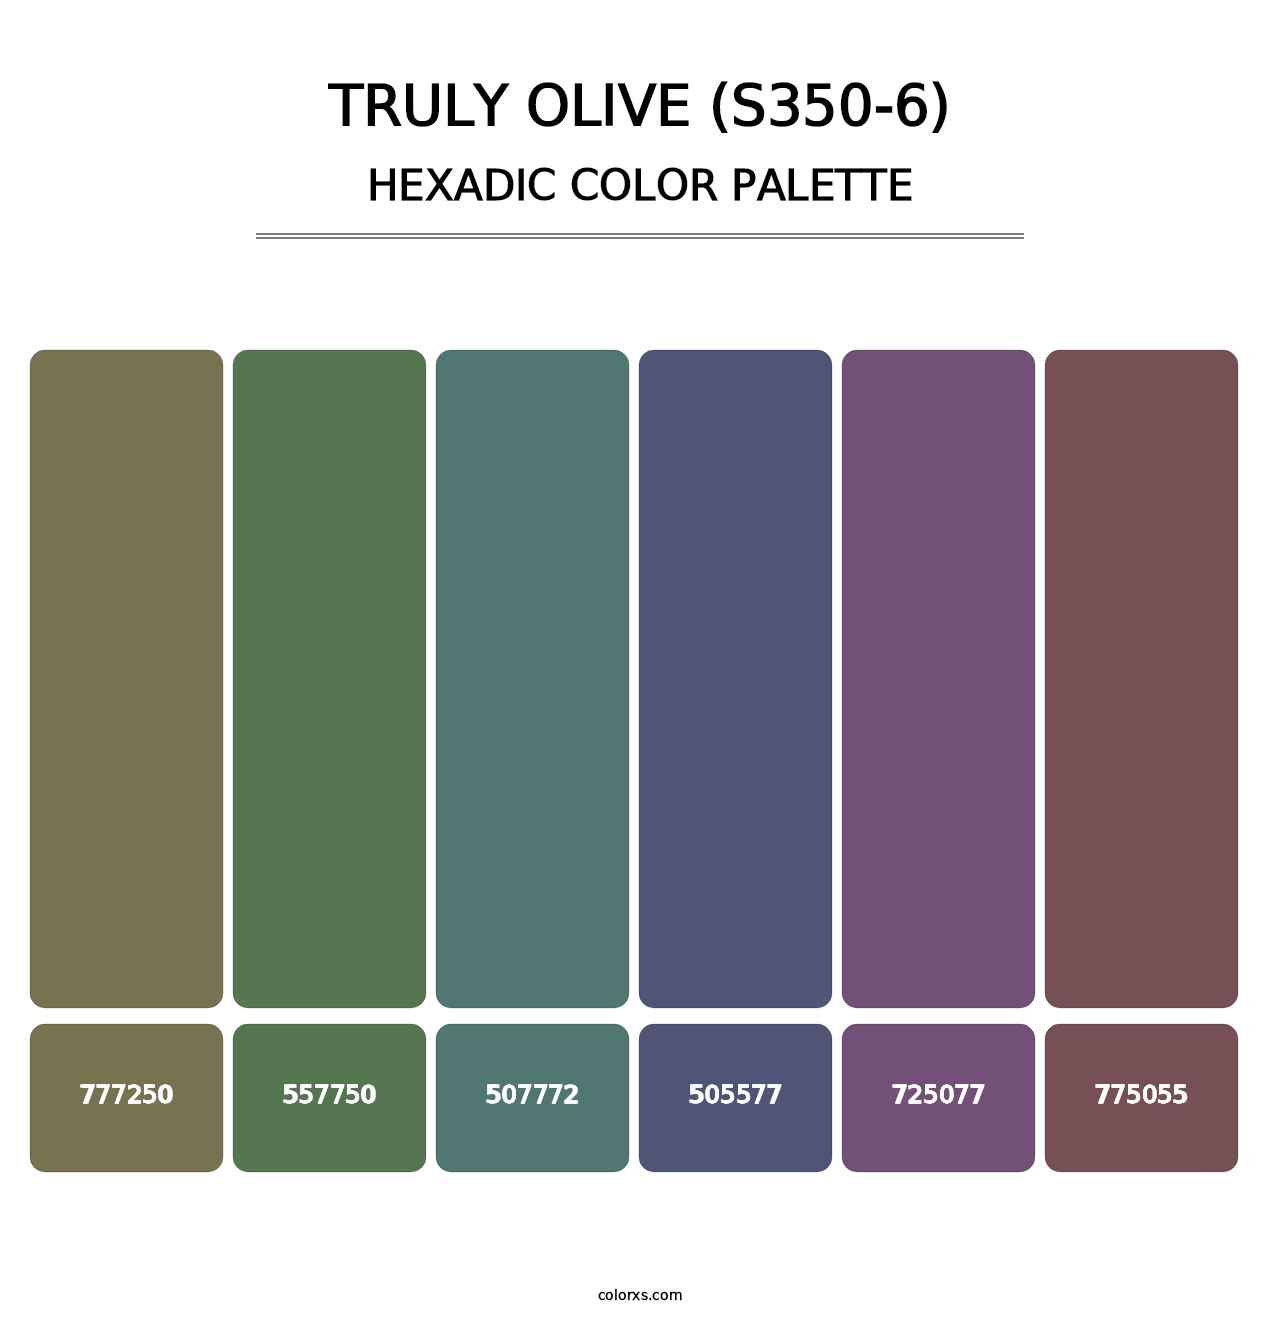 Truly Olive (S350-6) - Hexadic Color Palette